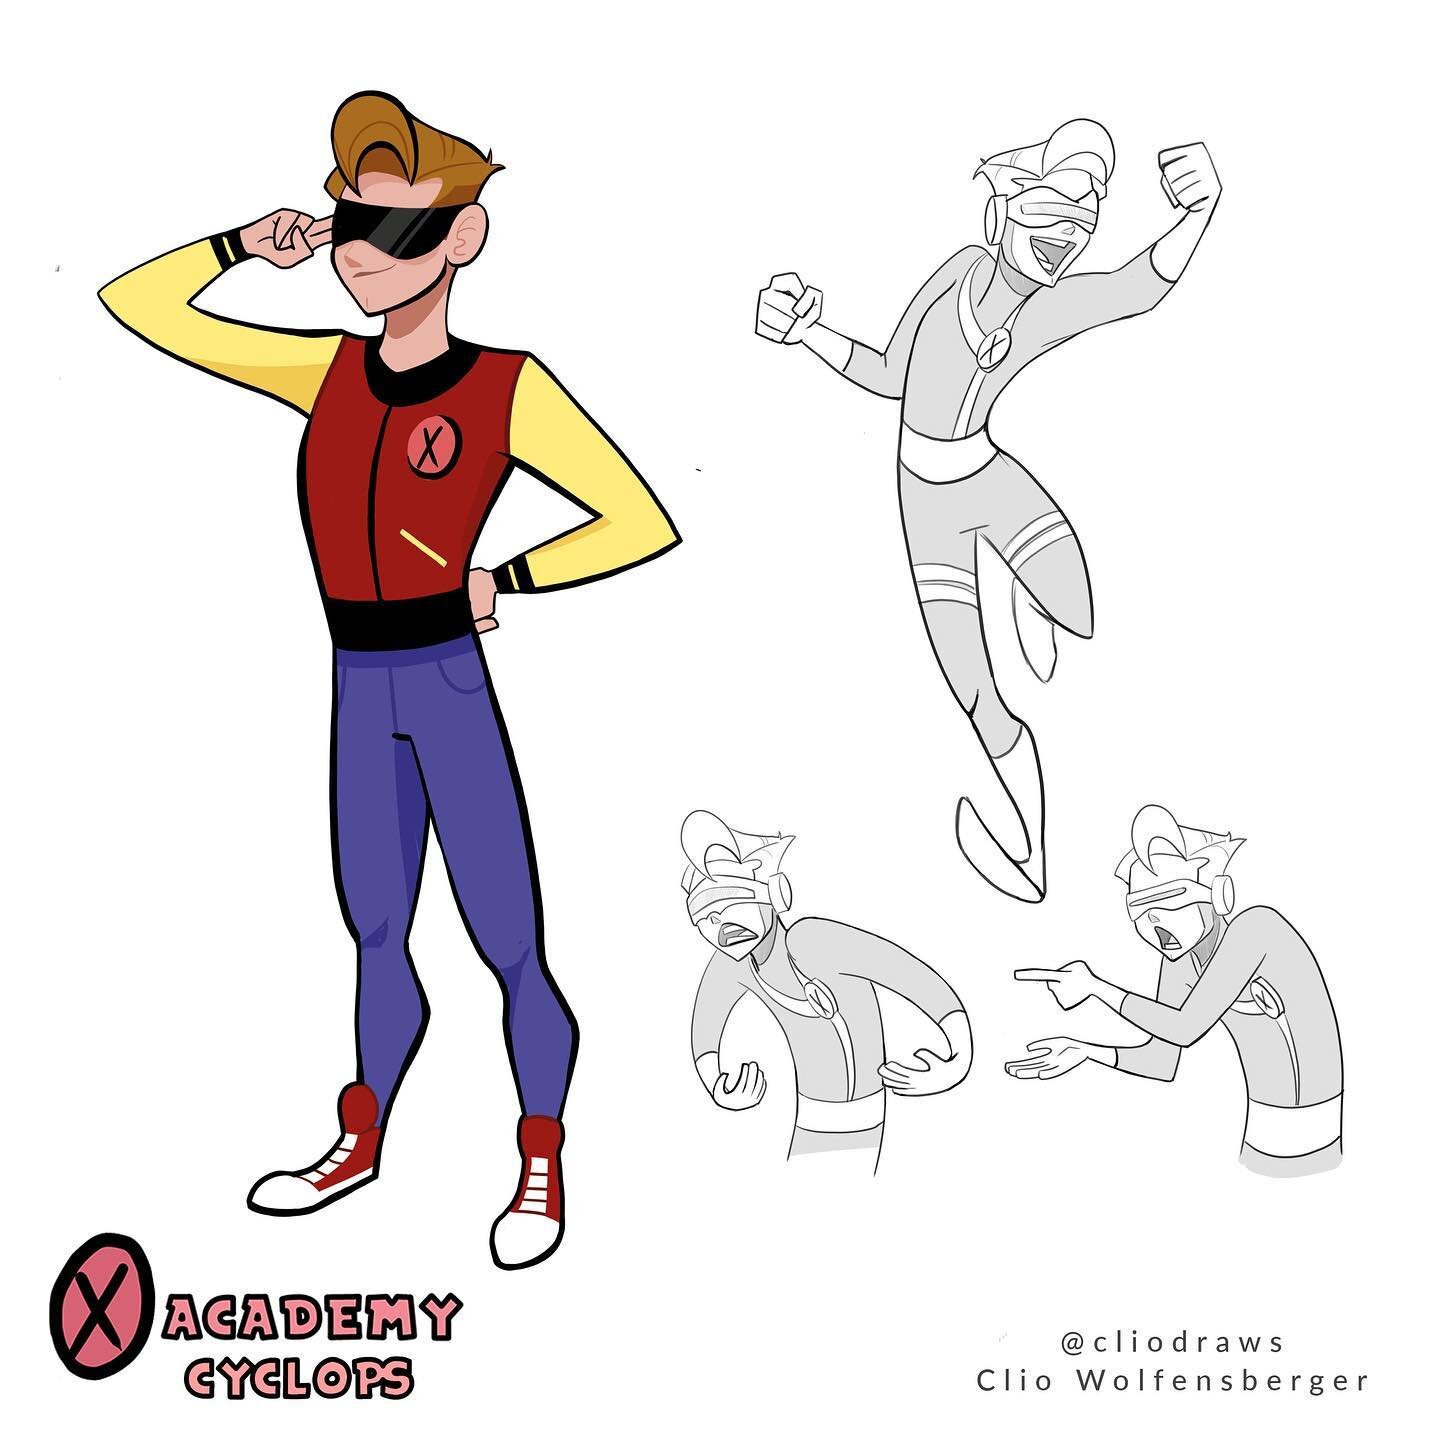 ᙭ ᗩᑕᗩᗪEᗰY
young Cyclops 💥
&bull;
And he&lsquo;s of course the cool kid on campus! 😎 
&bull;
#xmen #cyclops #marvel #characterdesign #conceptdesign #animation #tvanimation #comics #digitalart #glasses #superpowers #art #photoshop #wacom #illustratio